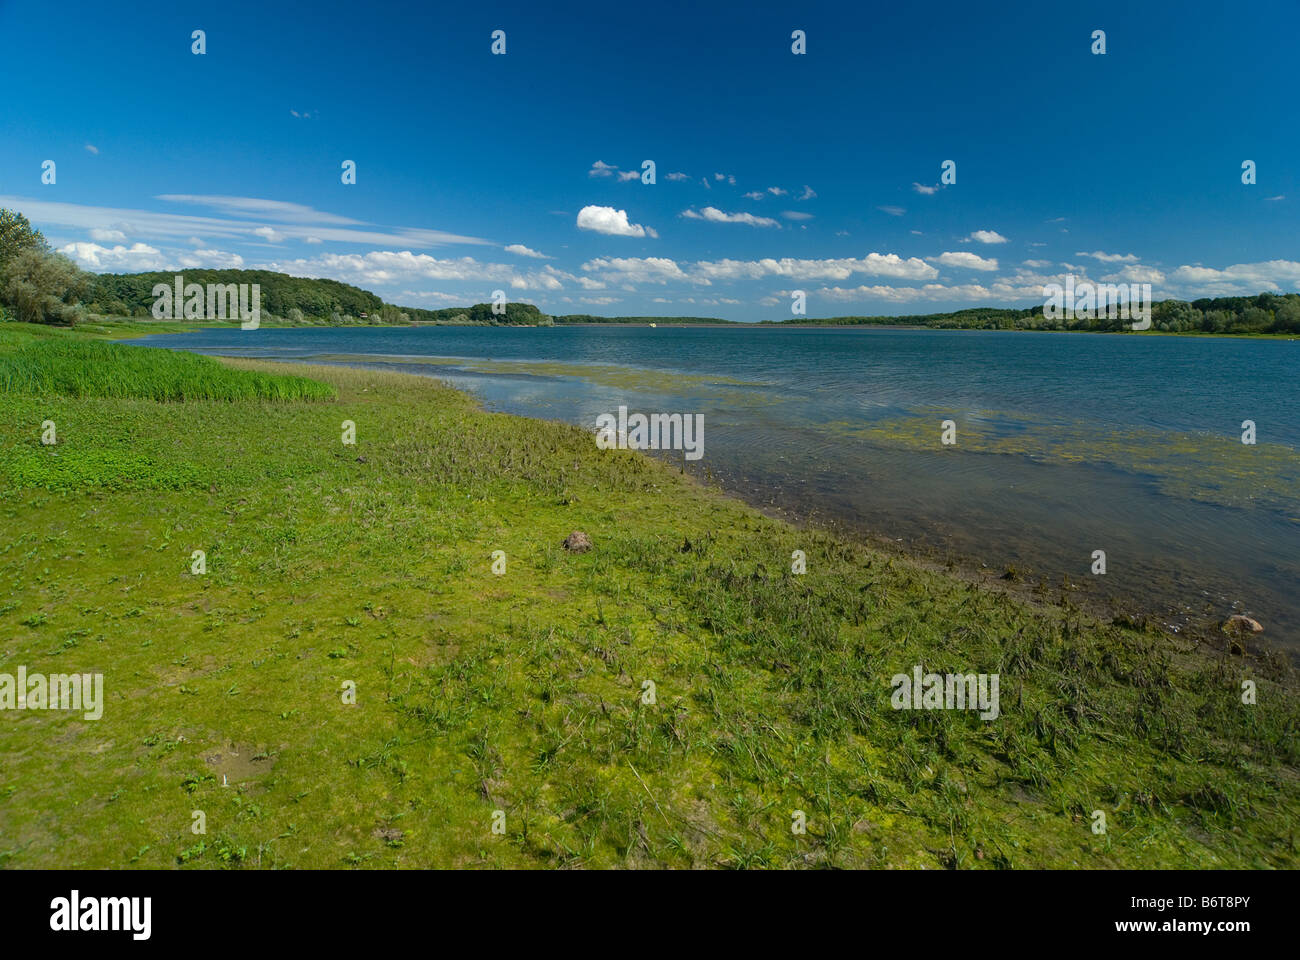 The michelbach lake in the Vosges mountains, france, europe Stock Photo